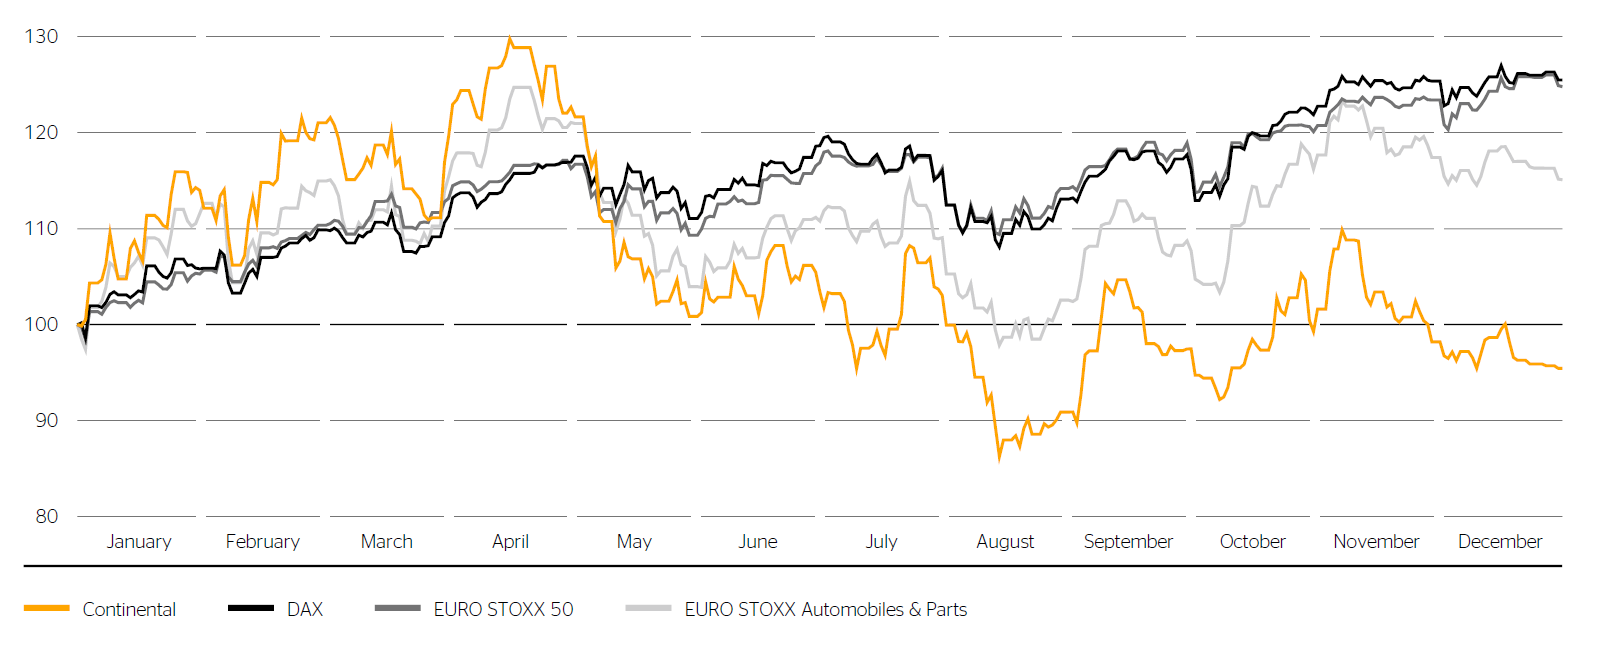 Price performance of Continental shares in 2019 versus selected stock indexes